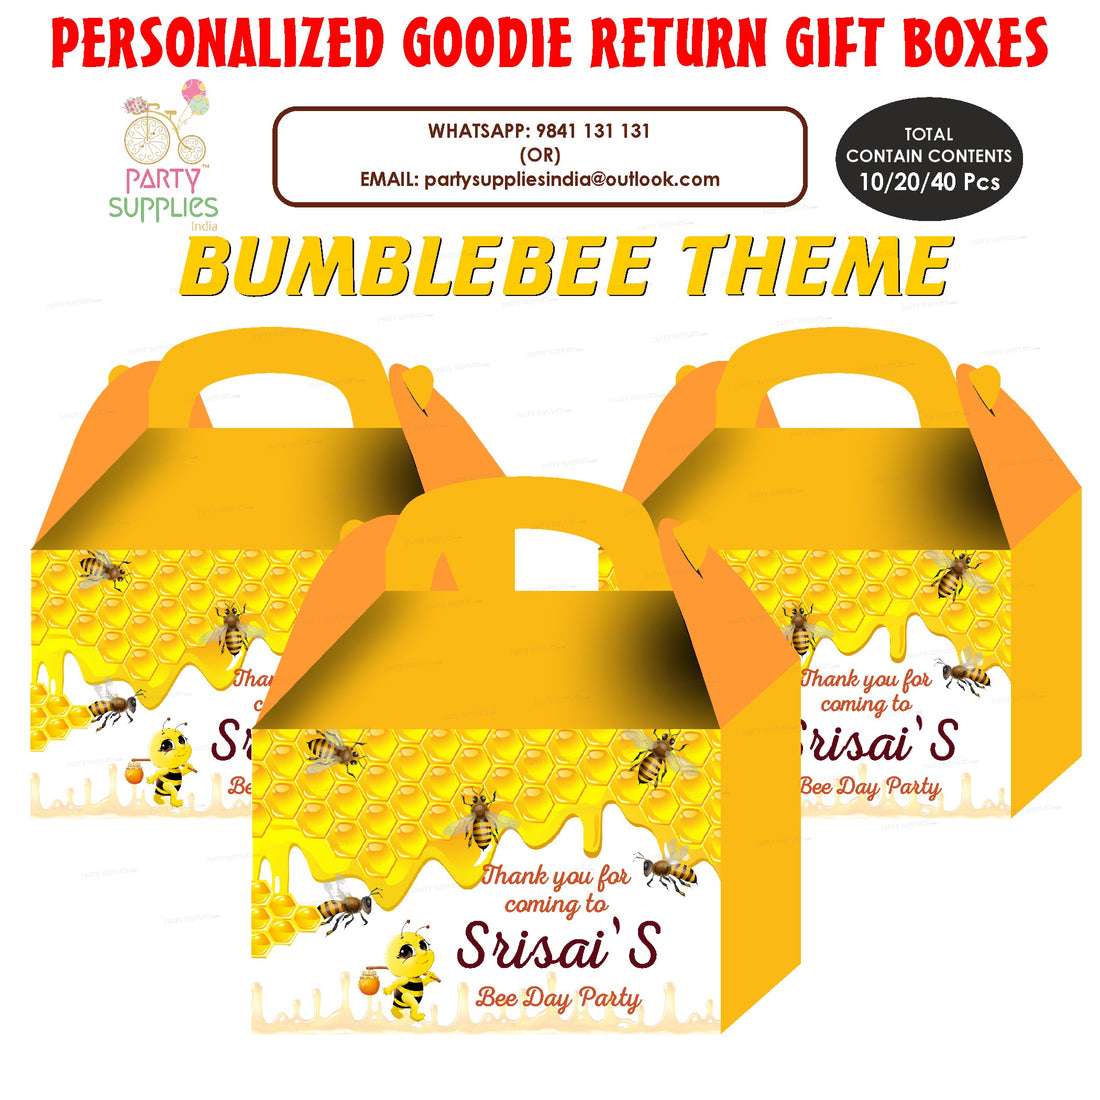 Bumblebee Birthday Party Decorations | Happy Bee Day Party Kit